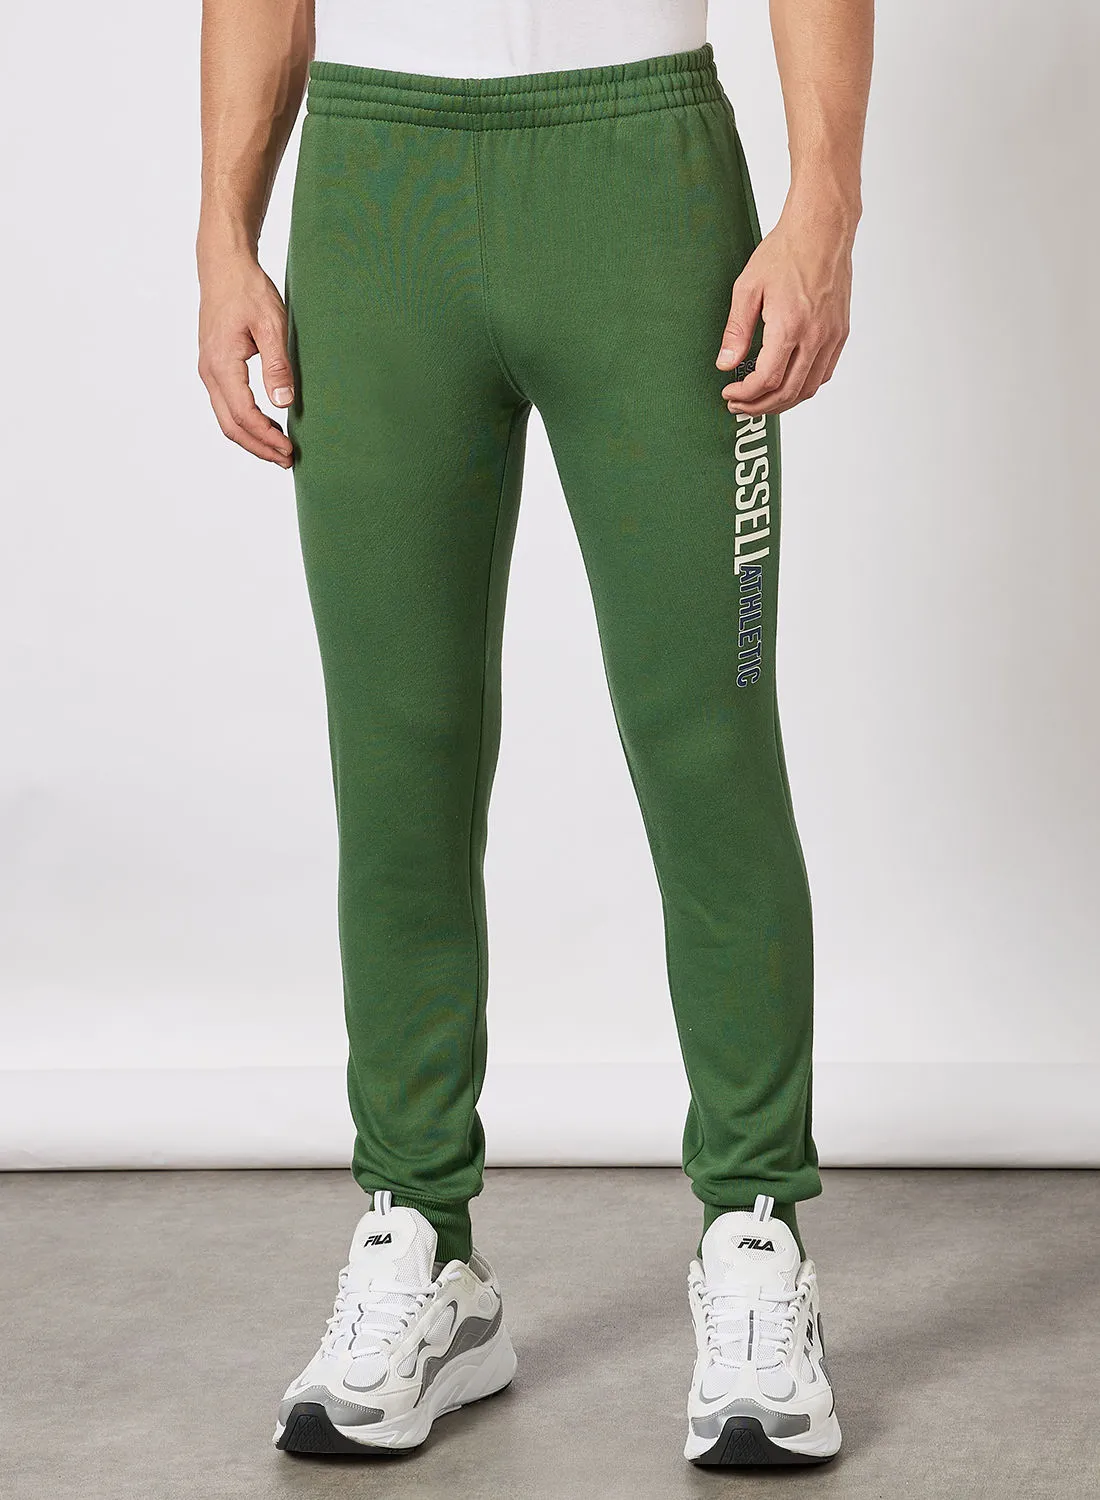 Russell Athletic Logo Slim Fit Sweatpants Green